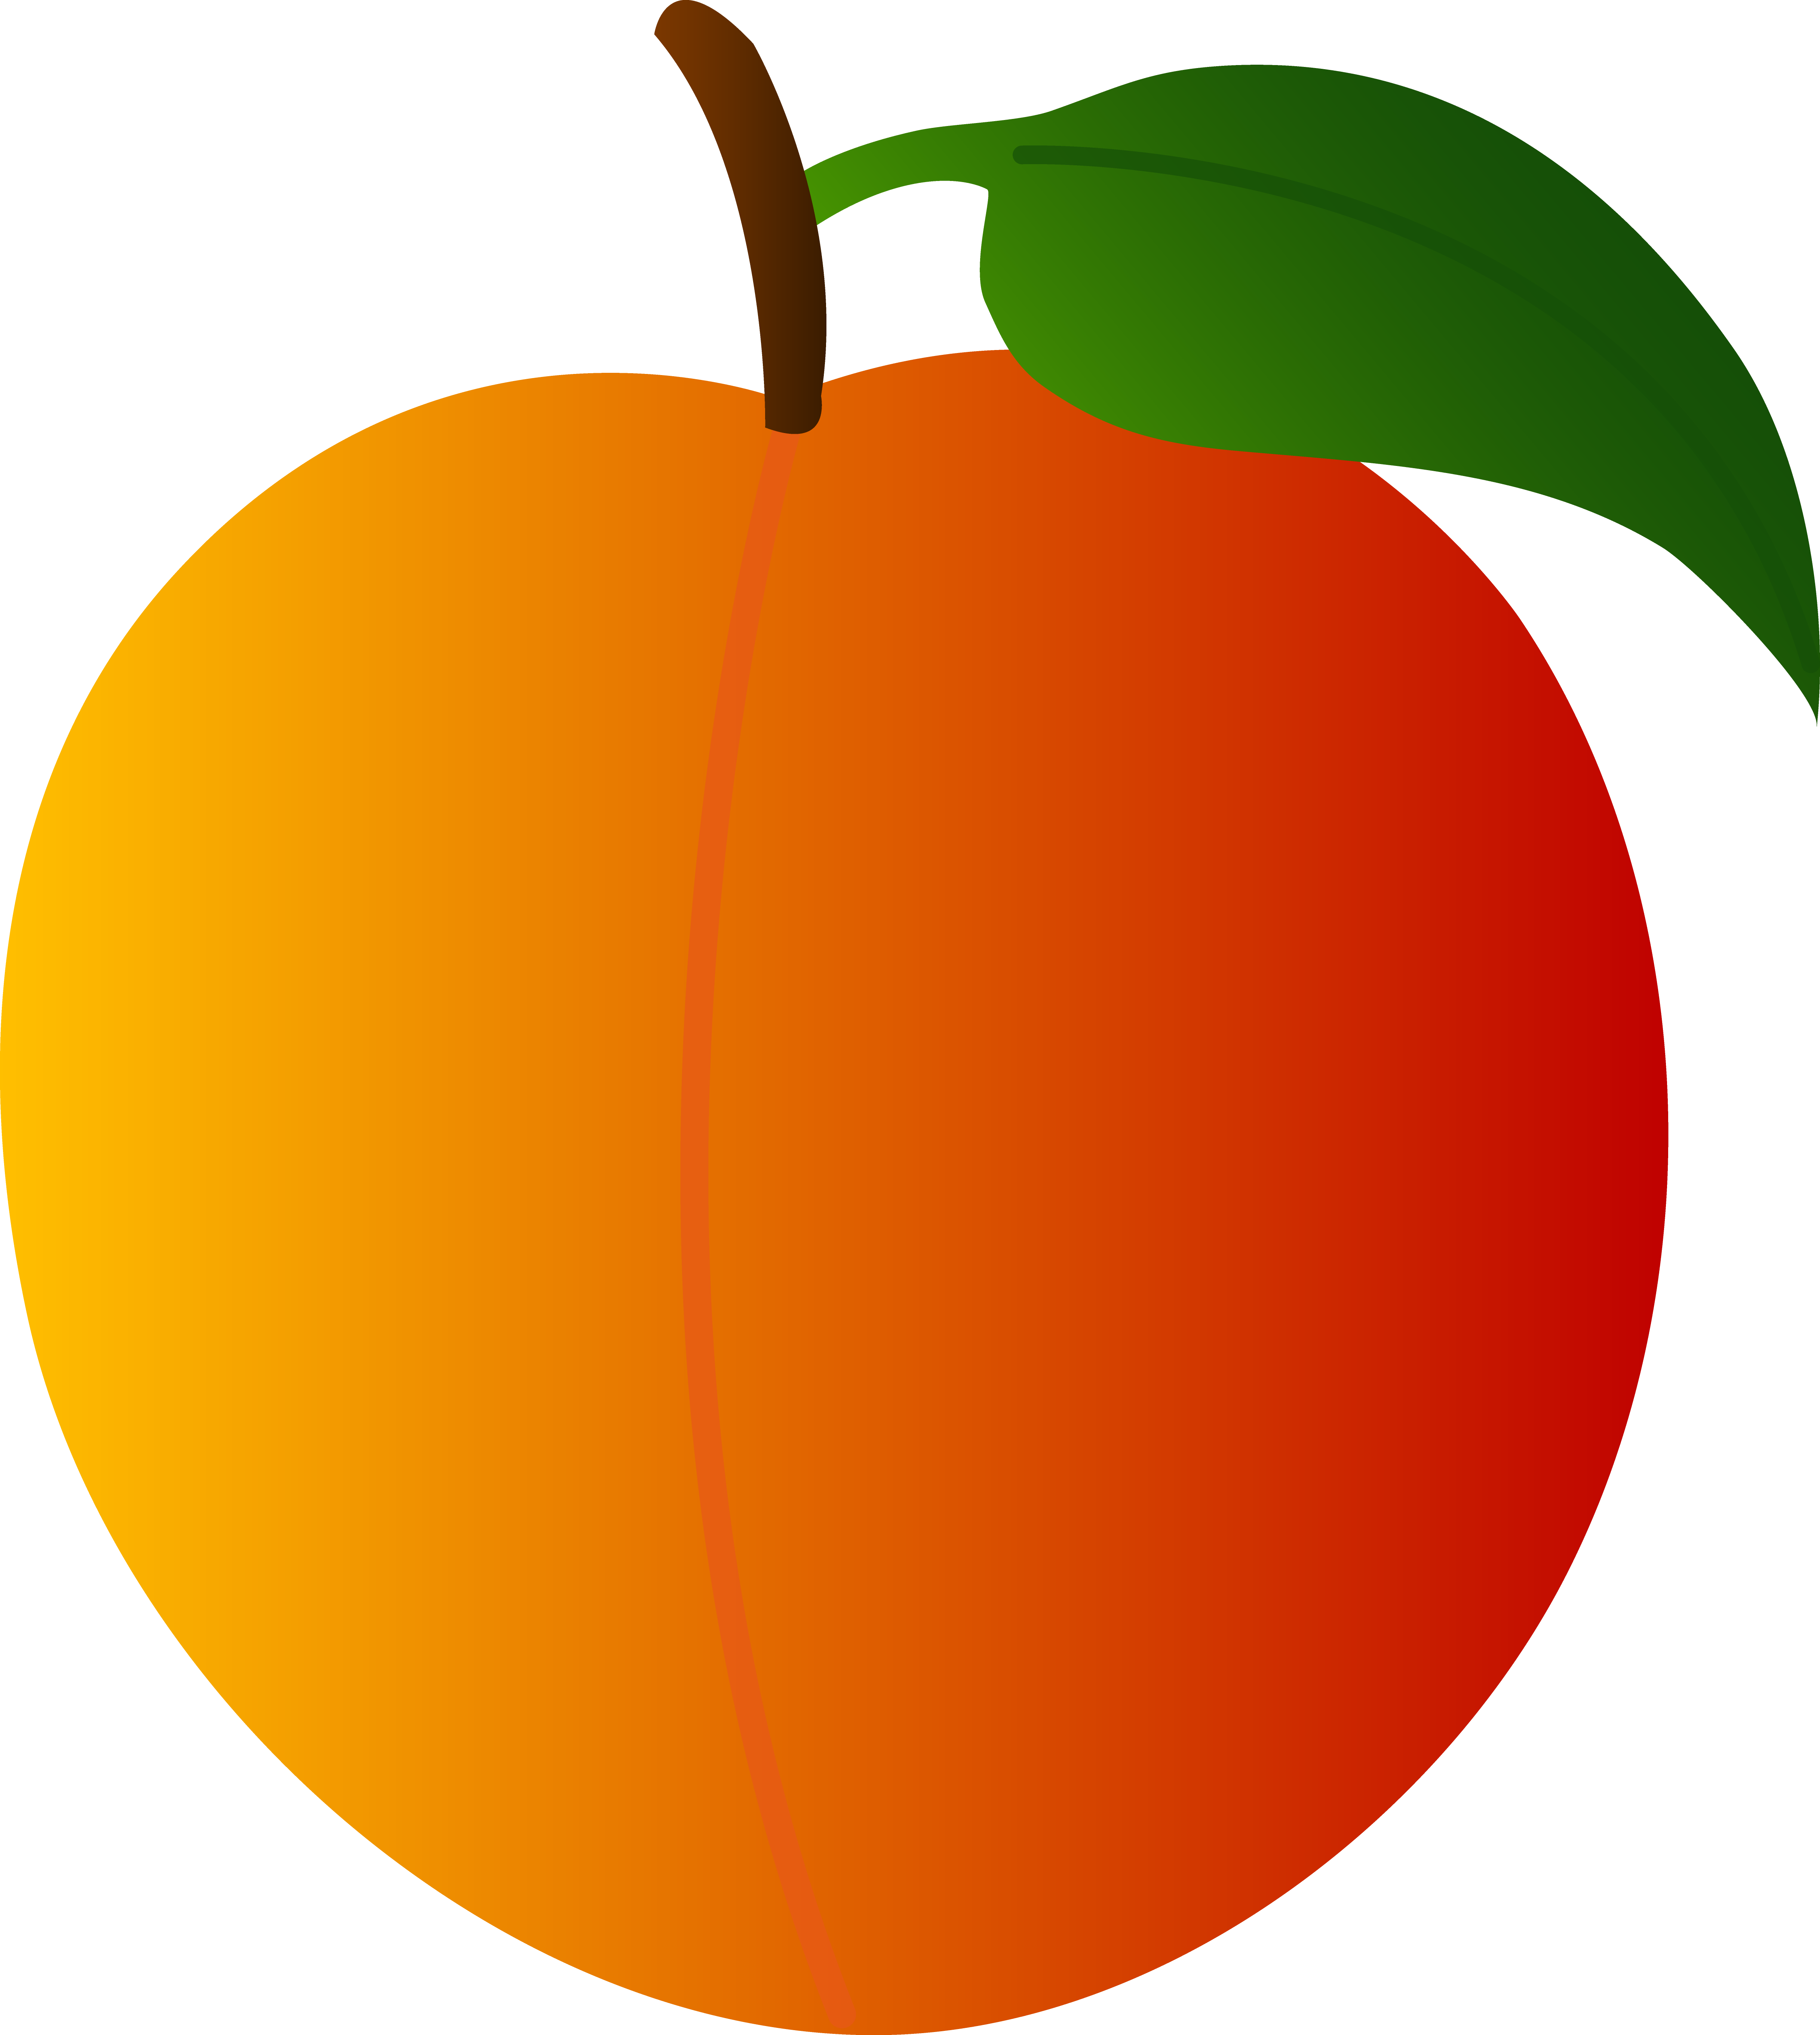 fruits pictures clipart - photo #24